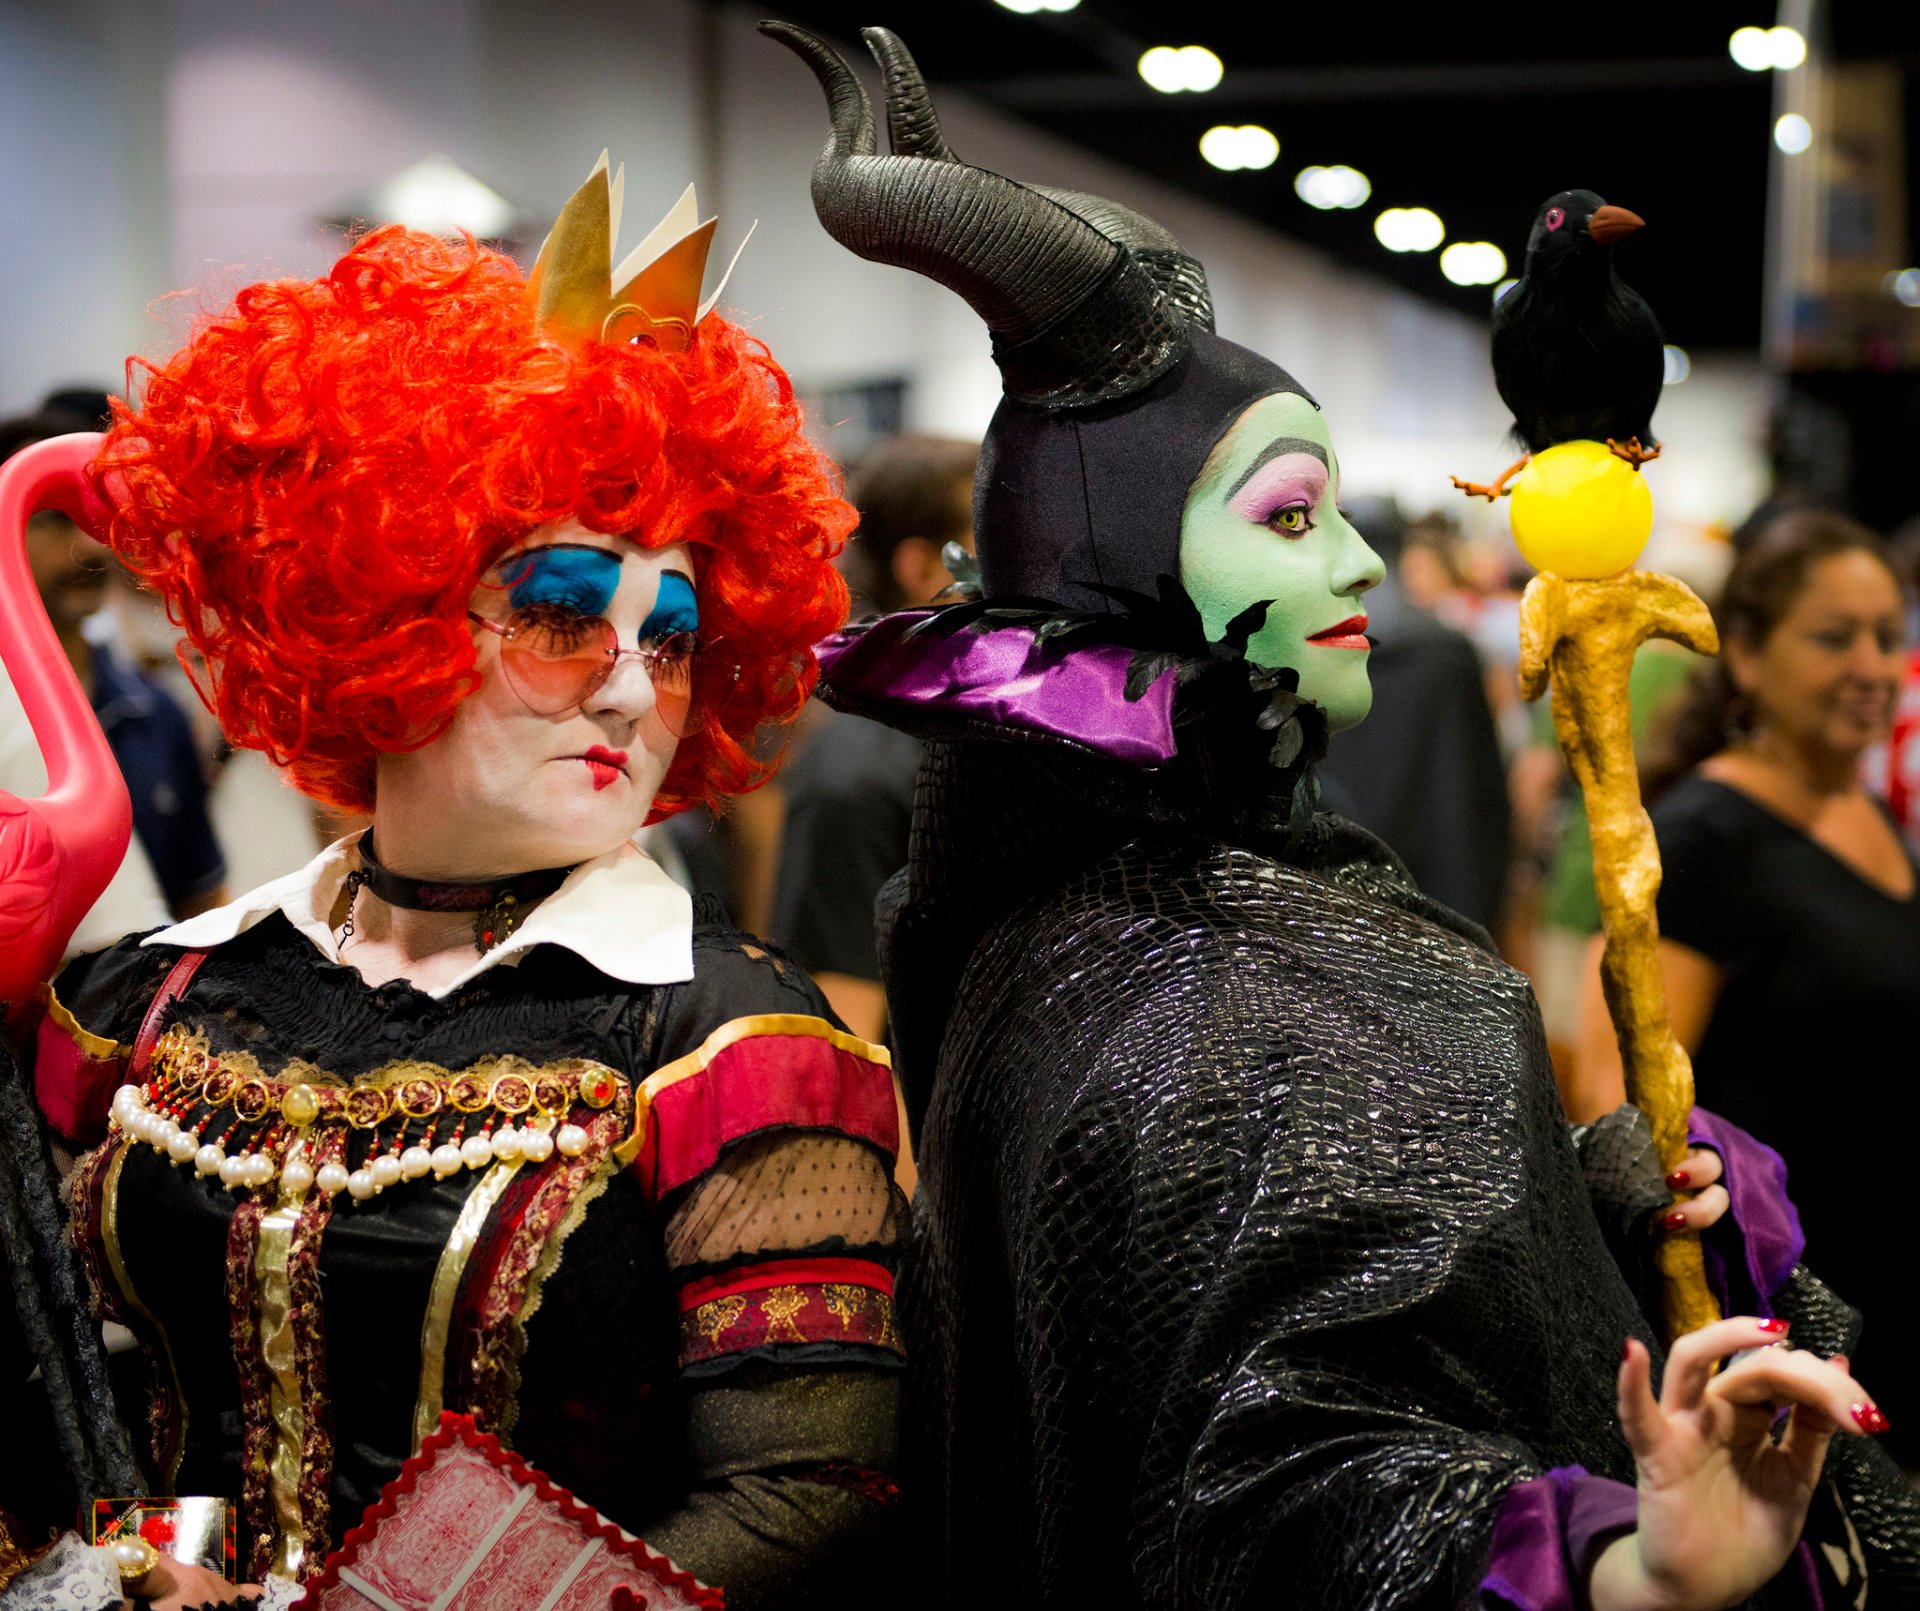 Tampa Bay Comic Con Moves Forward With July Dates METROCON Cancels  WUSF  Public Media